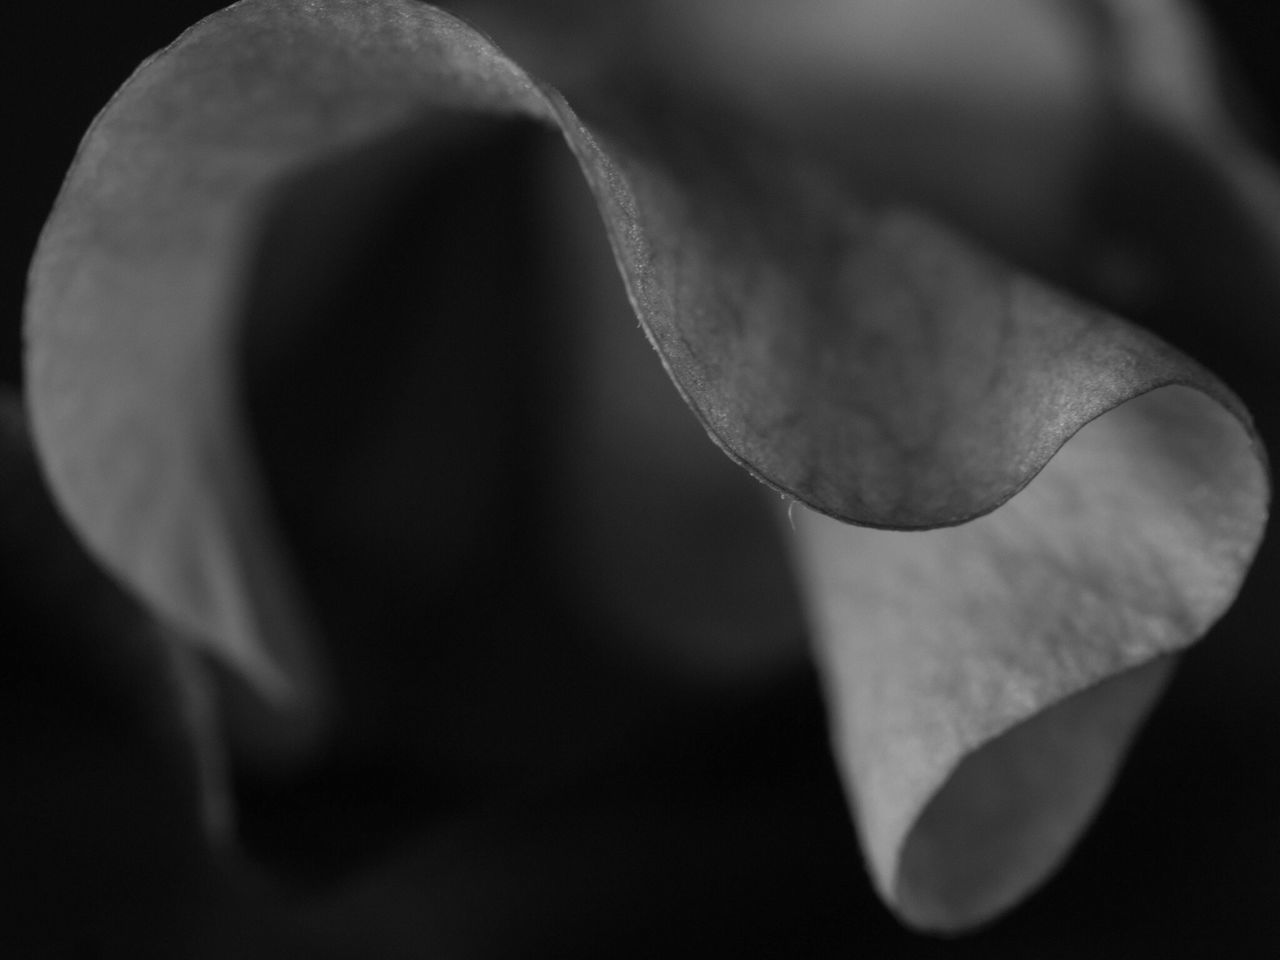 close-up, fragility, no people, nature, indoors, day